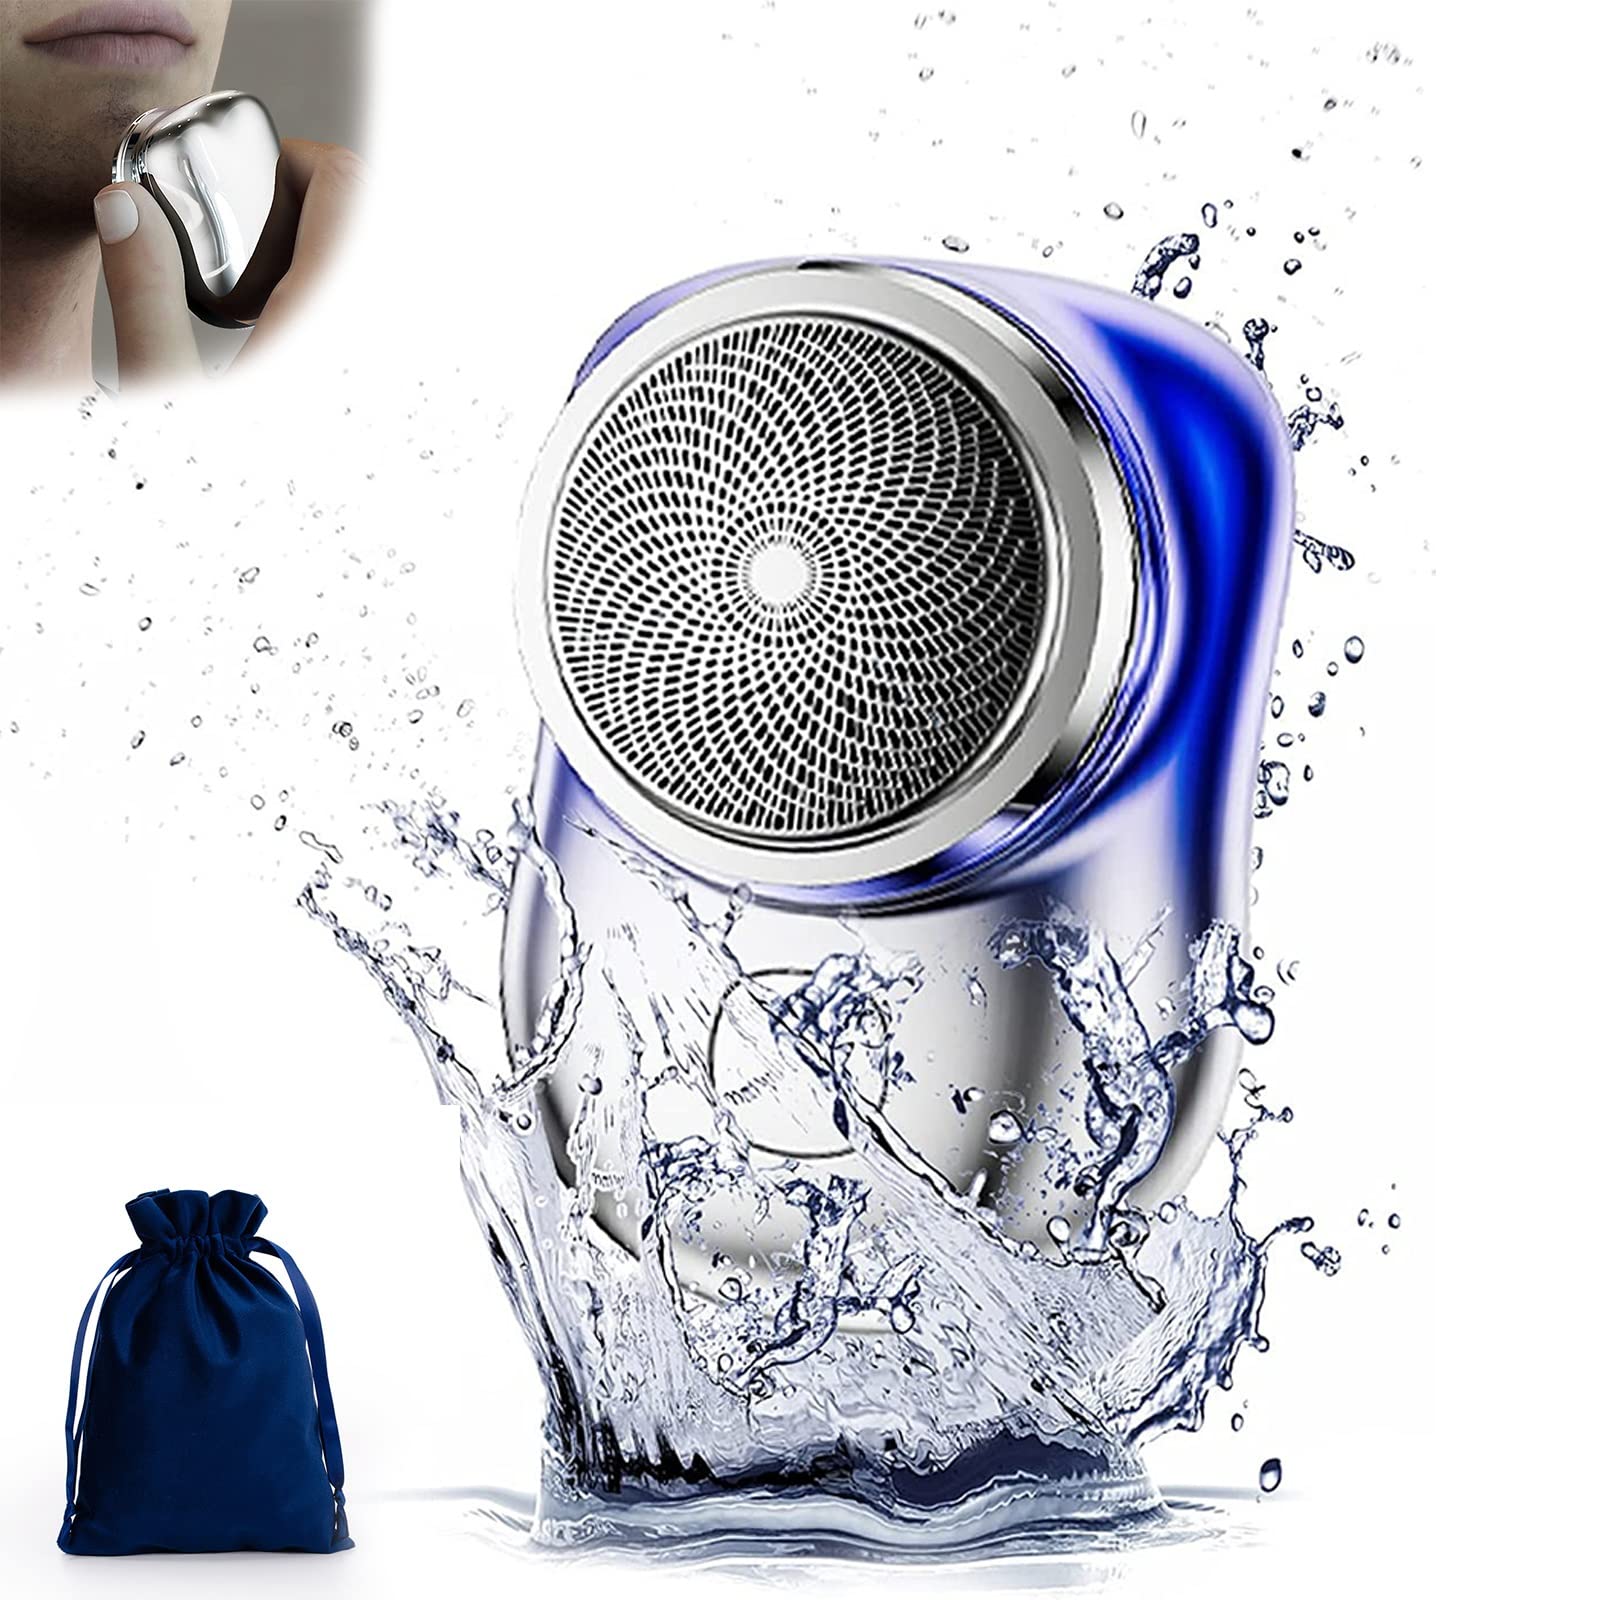 Electric Shaver"